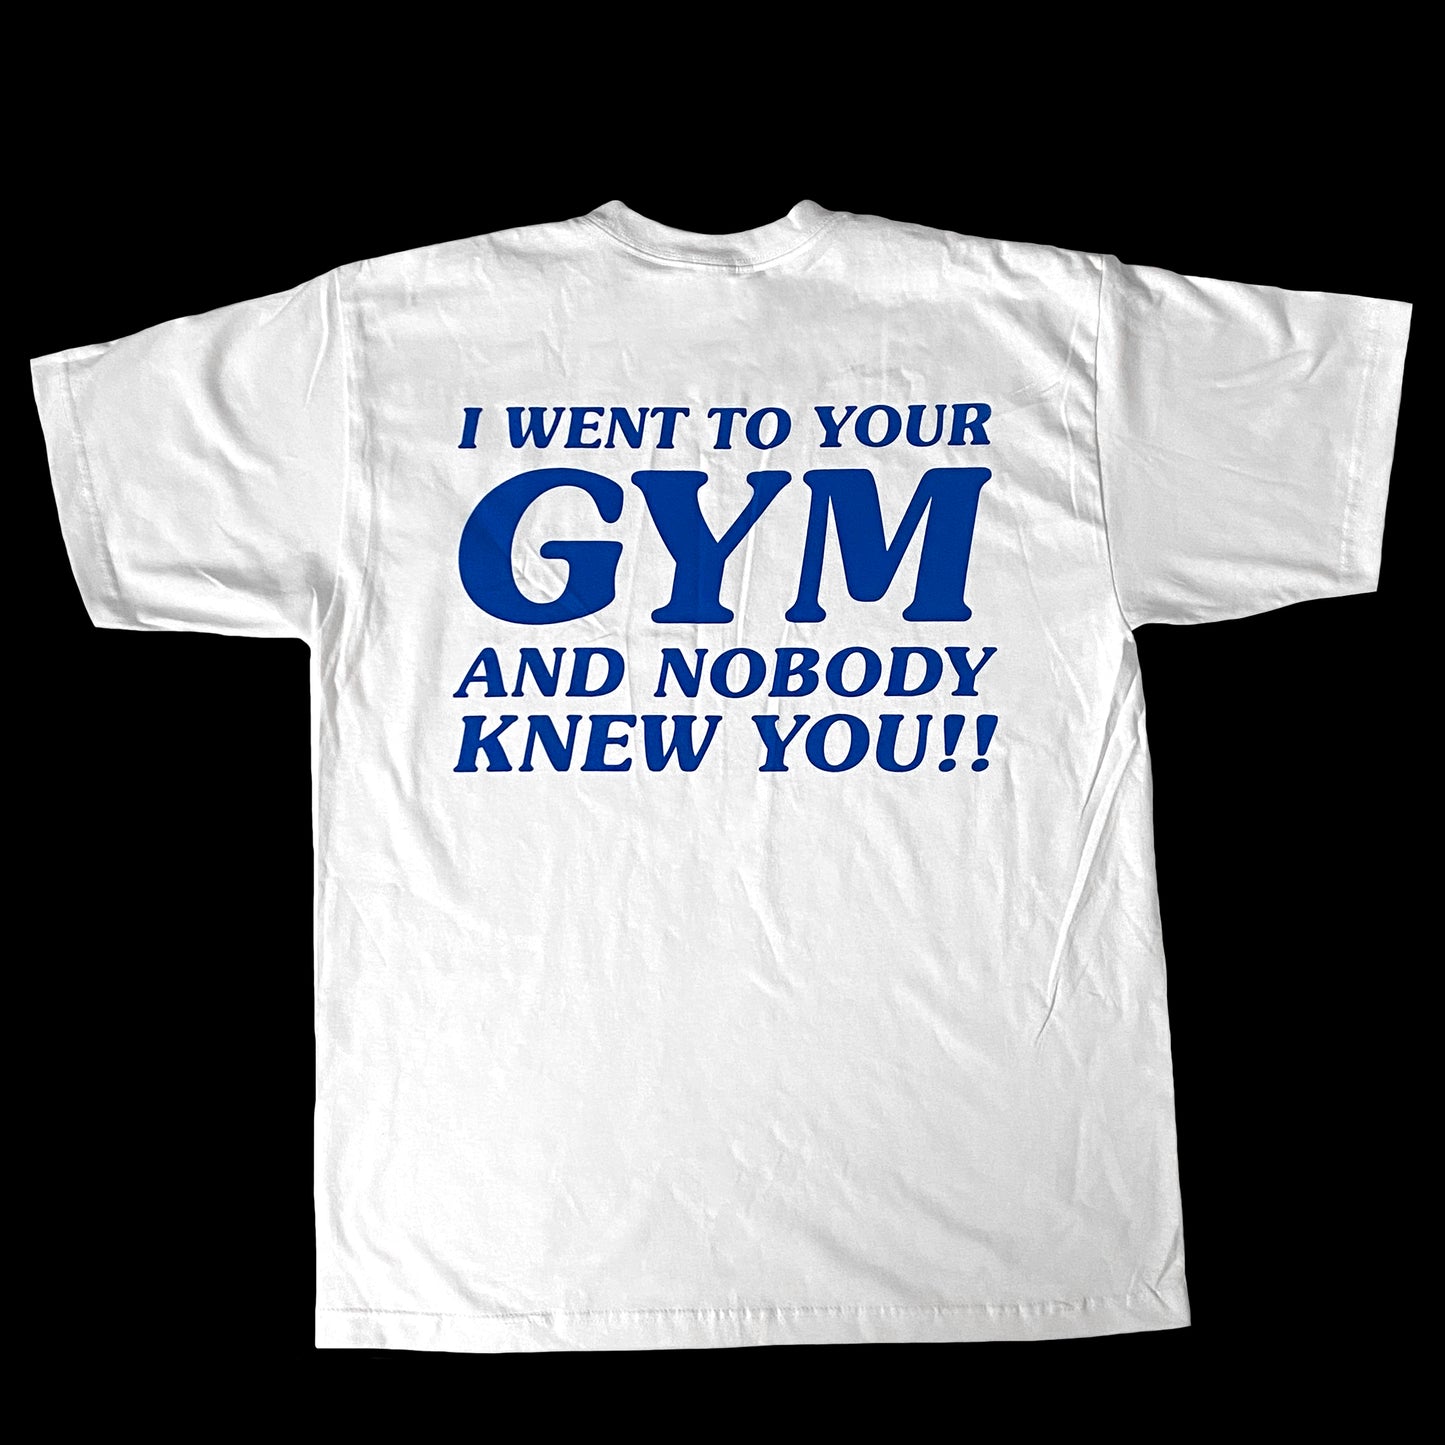 I Went to Your Gym and Nobody Knew You!